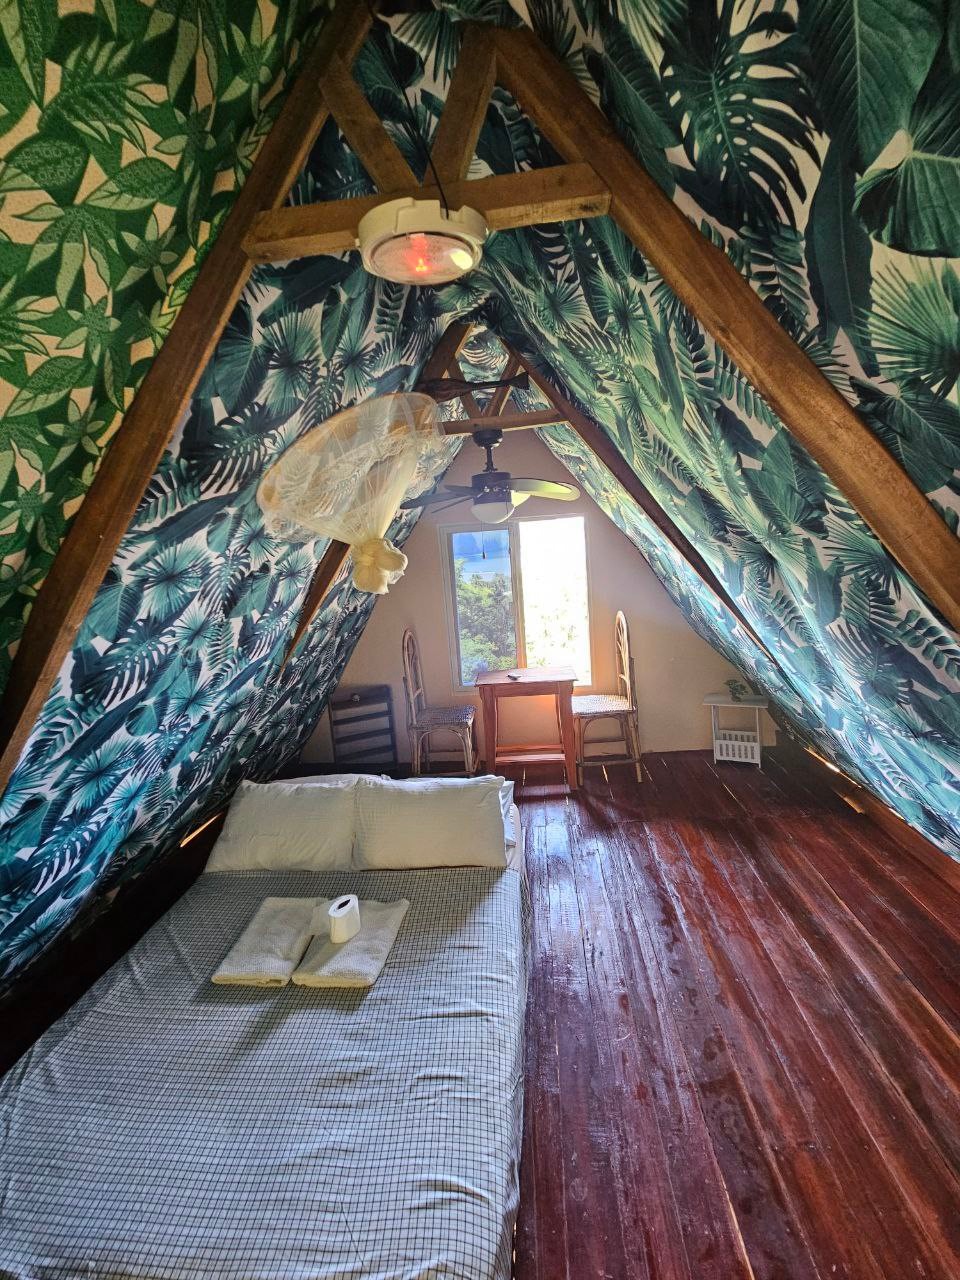 Forest Camp El Nido (Deluxe Chalets)